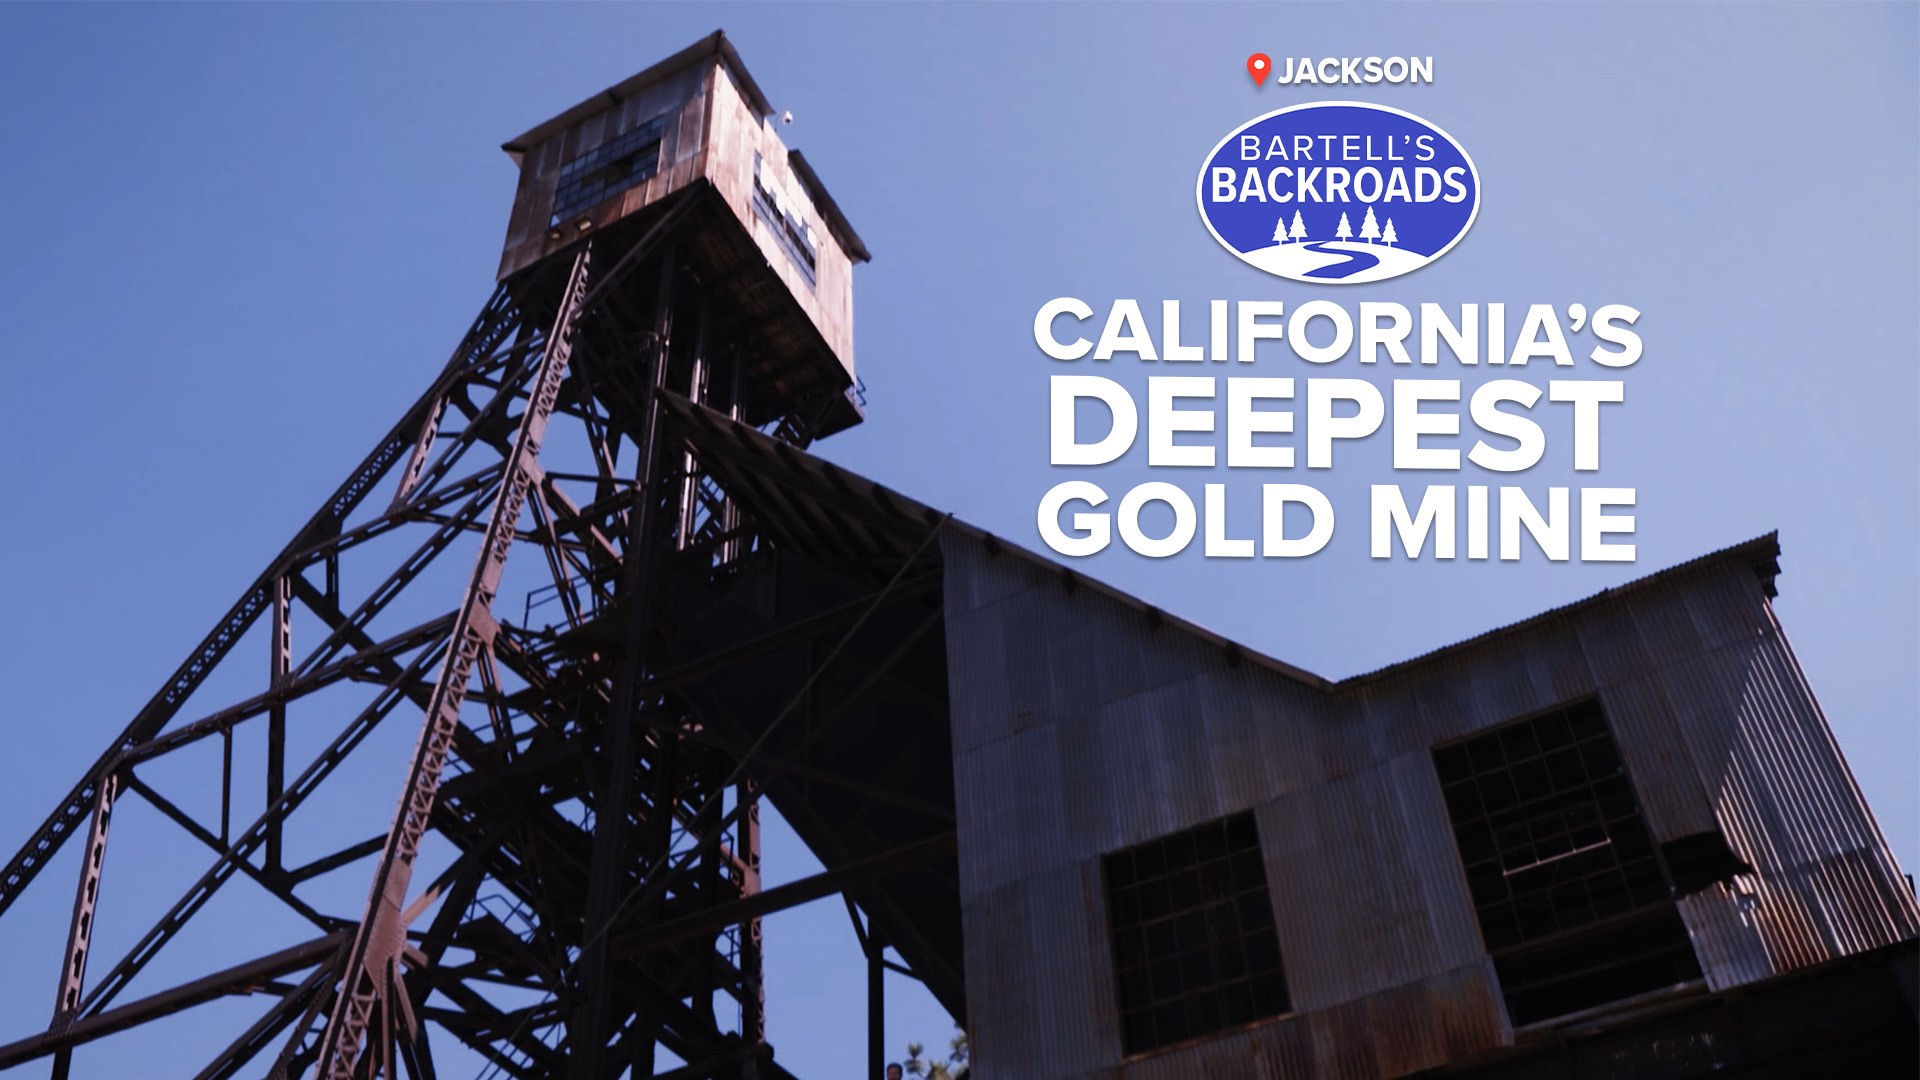 There's nowhere to go but down. At over a mile deep, the Kennedy Gold Mine is one of California's richest and deepest gold mines.